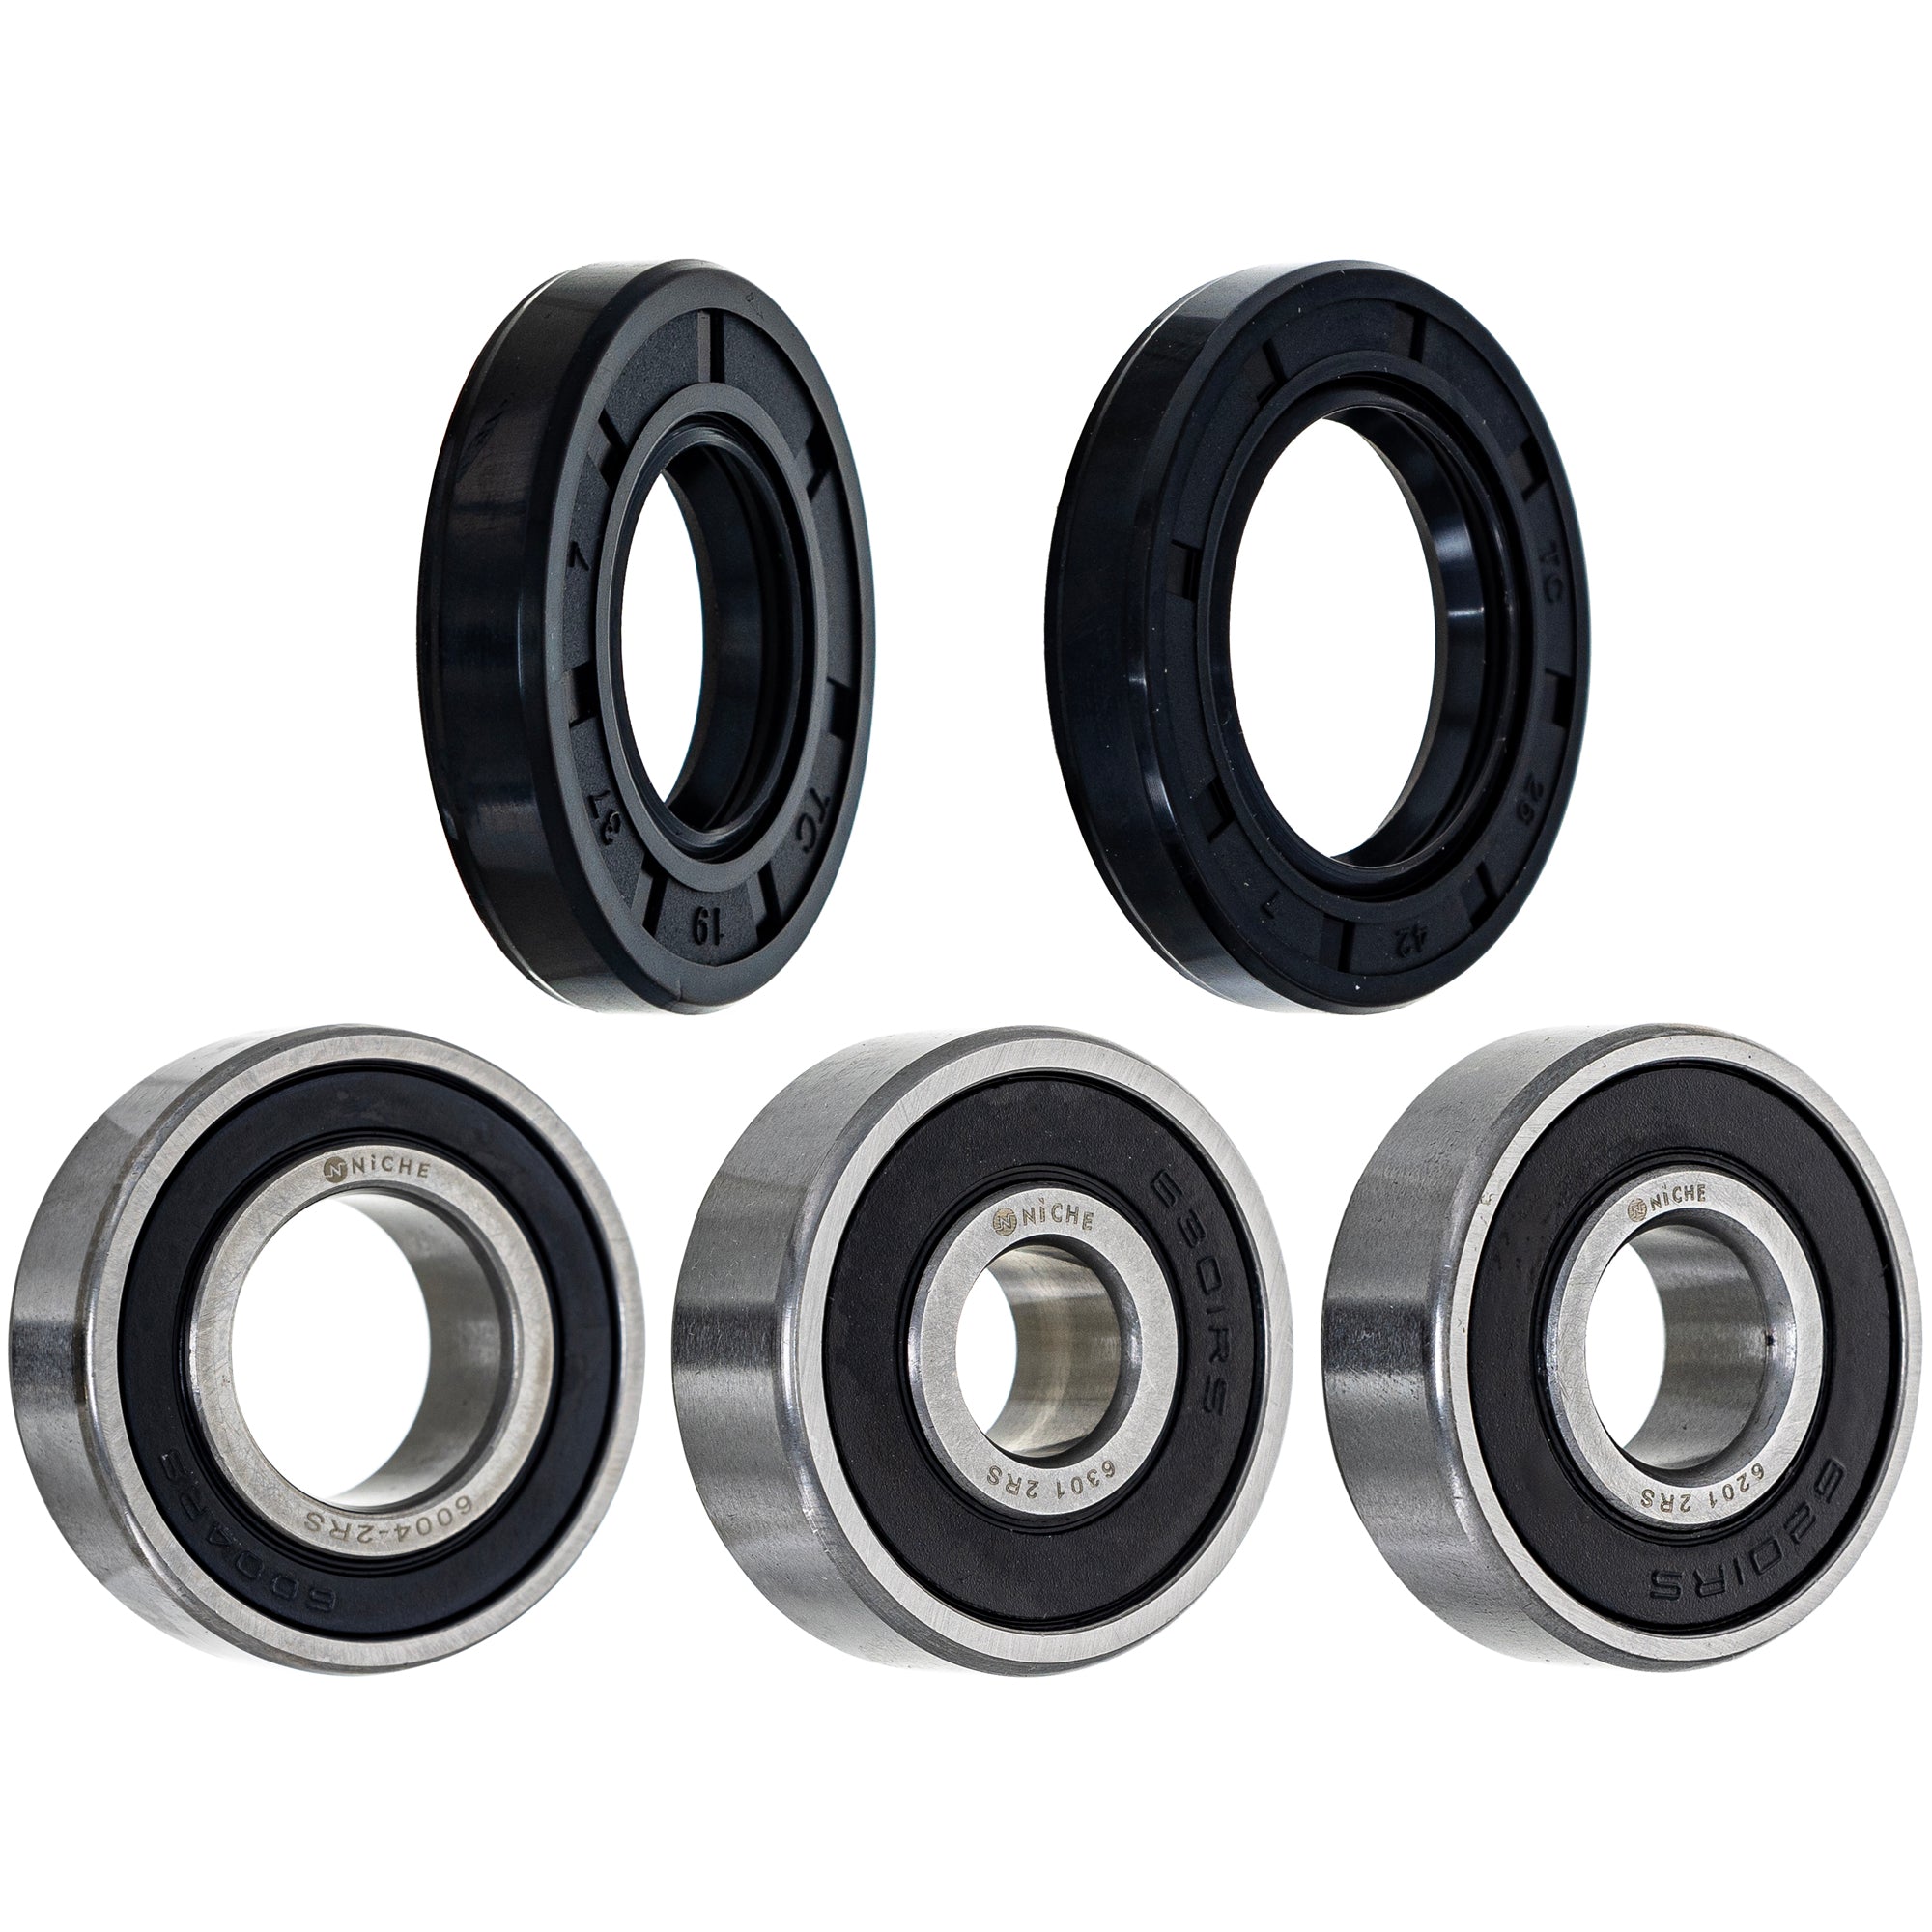 Wheel Bearing Seal Kit for zOTHER Ref No Z125 NICHE MK1008834